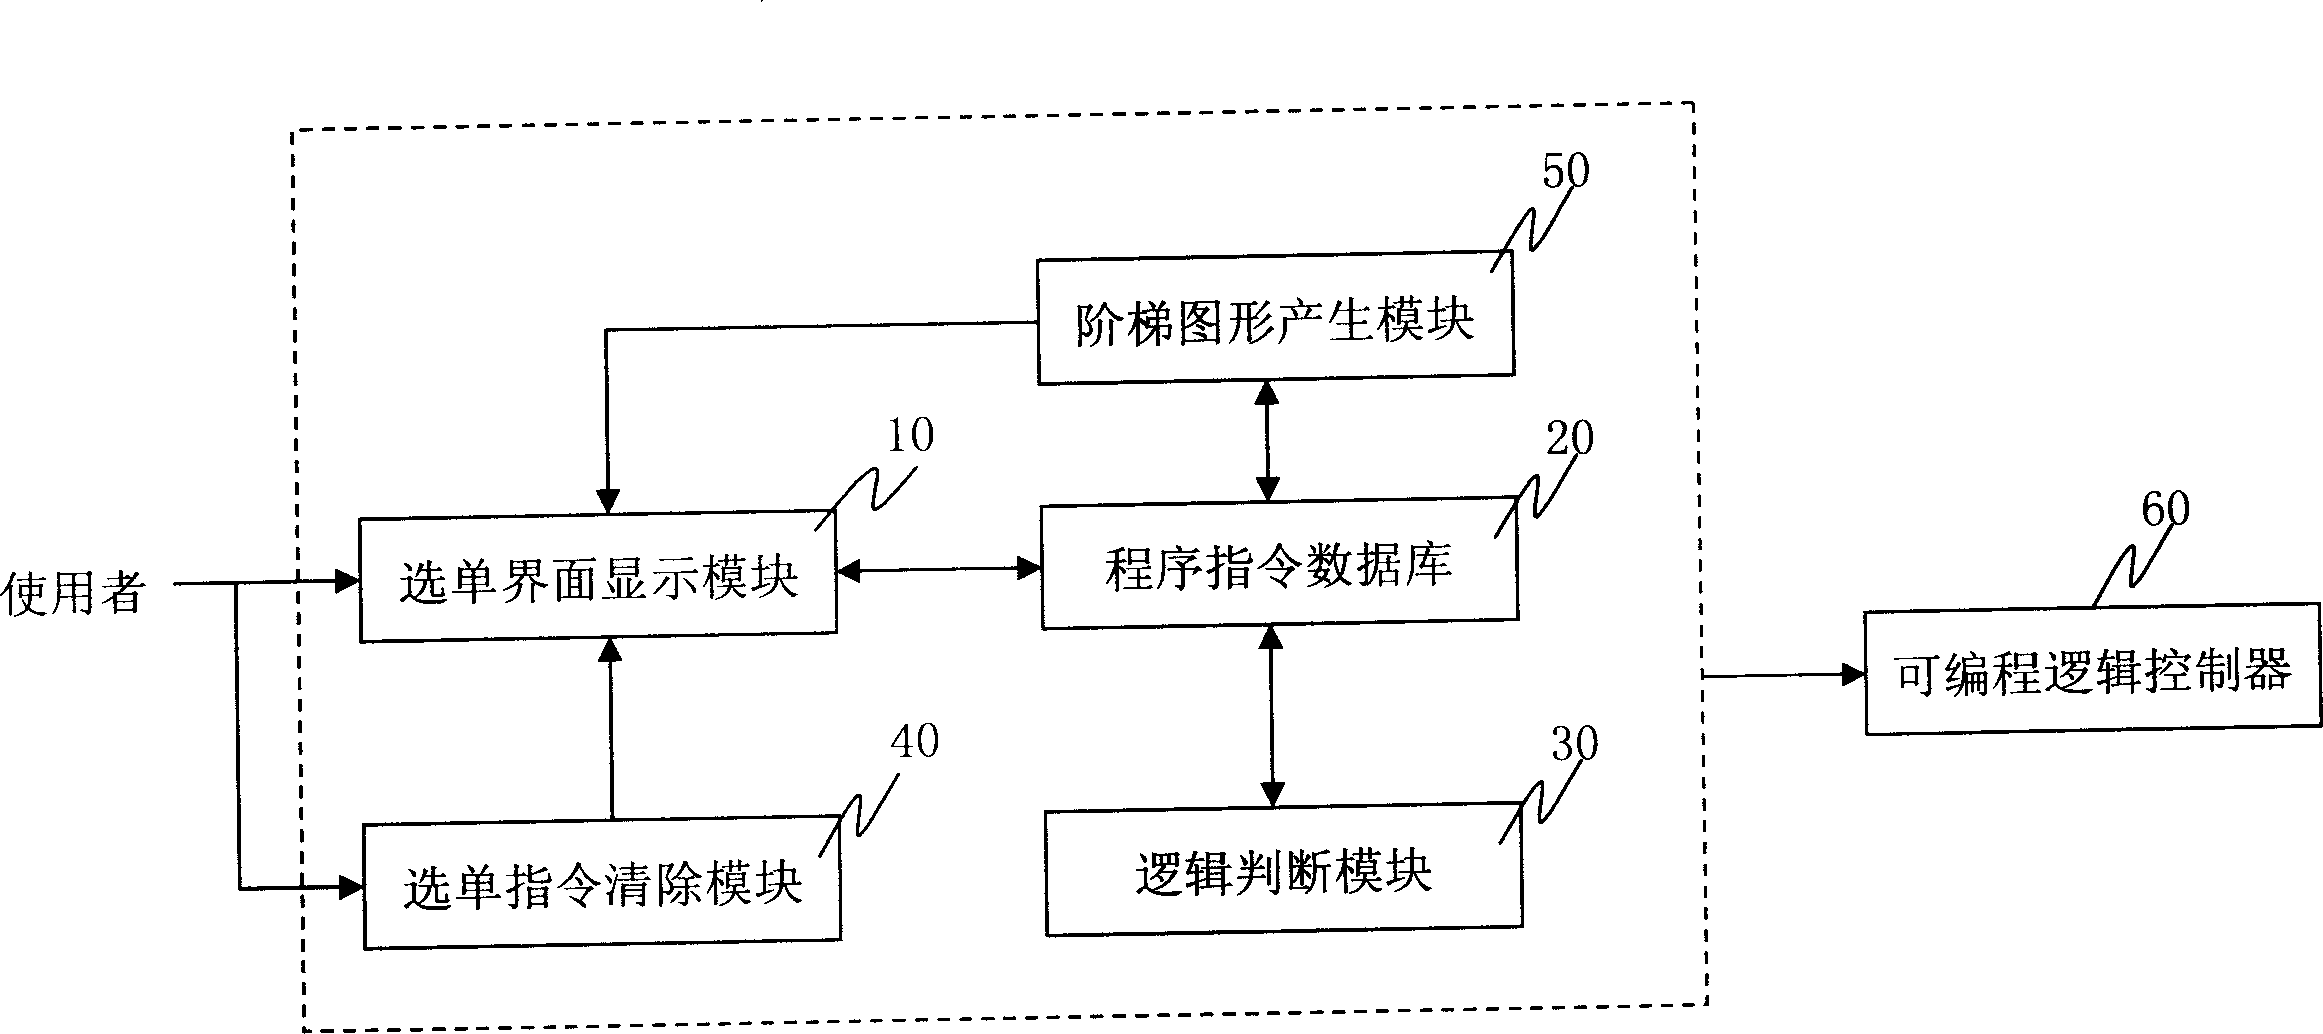 Program editing system and method for programmeable logic controller